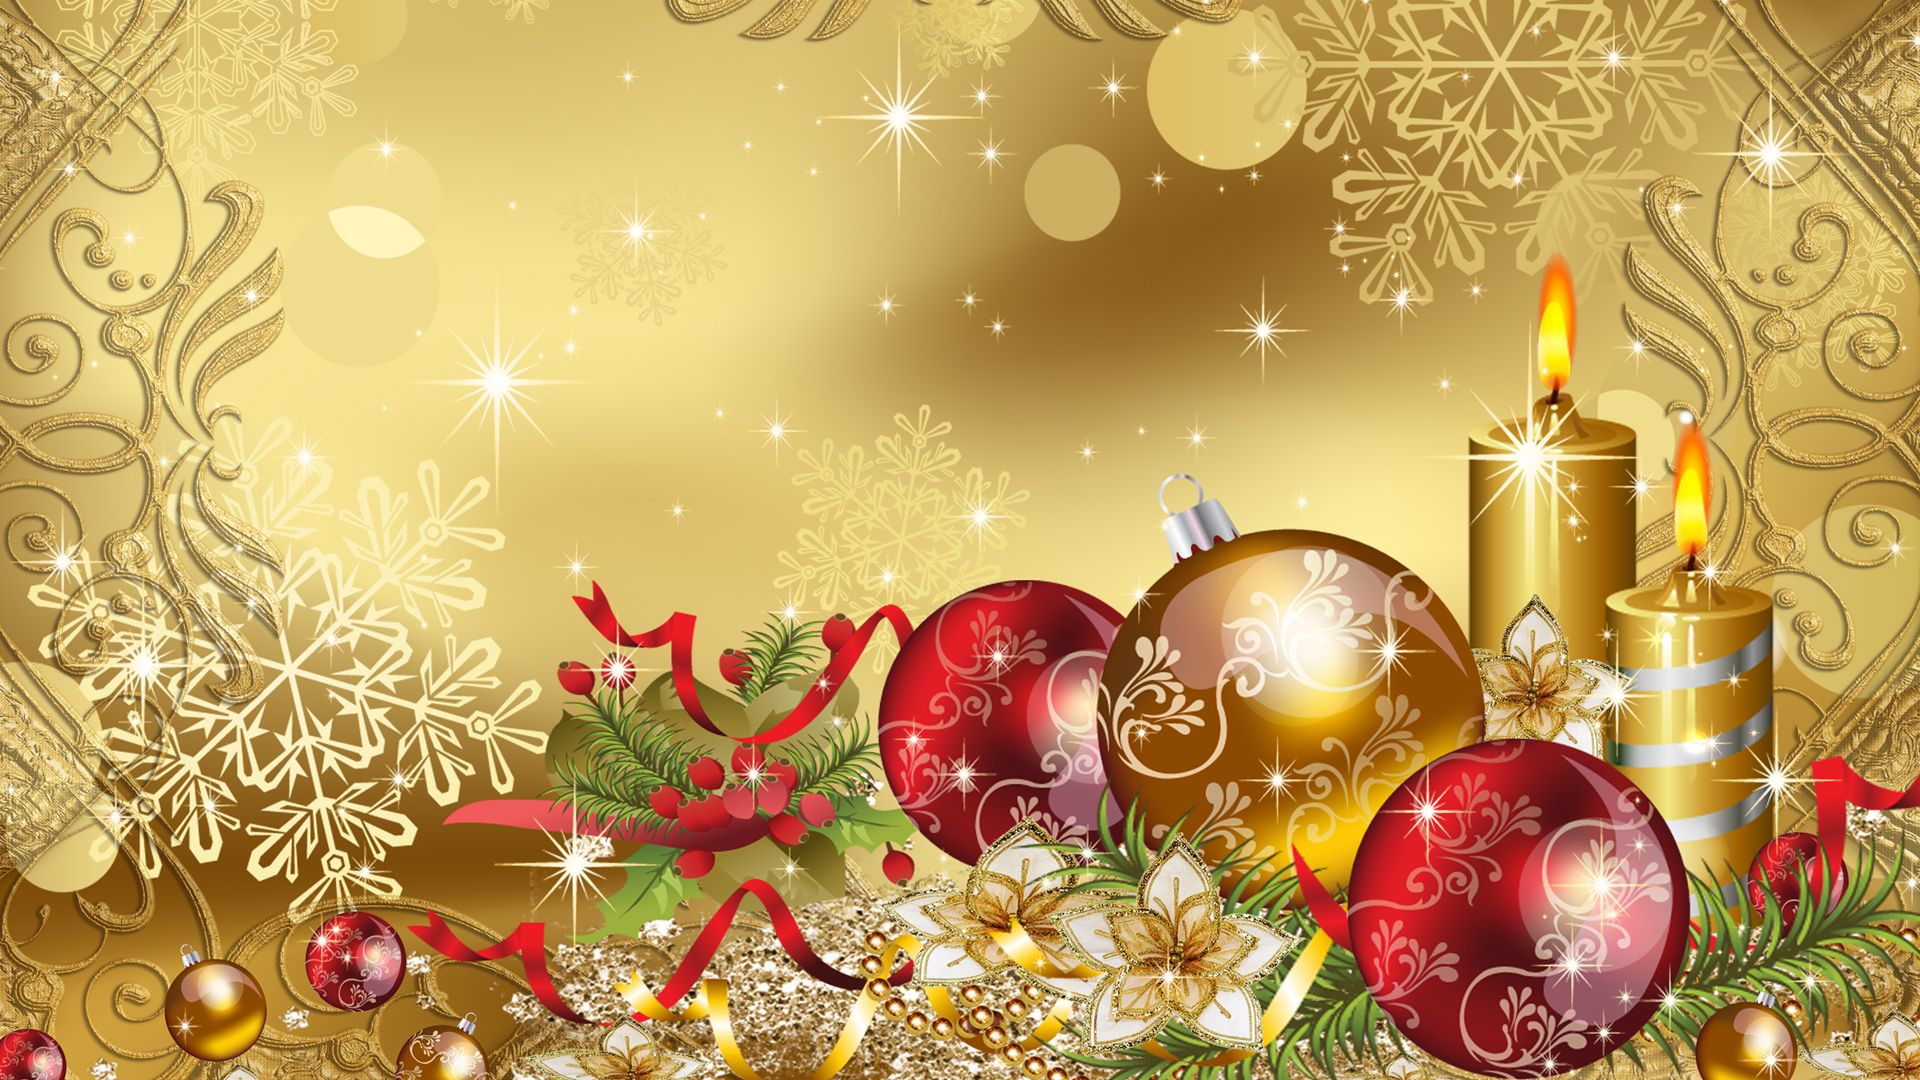 Free download Pin on Christmas [1920x1080] for your Desktop, Mobile